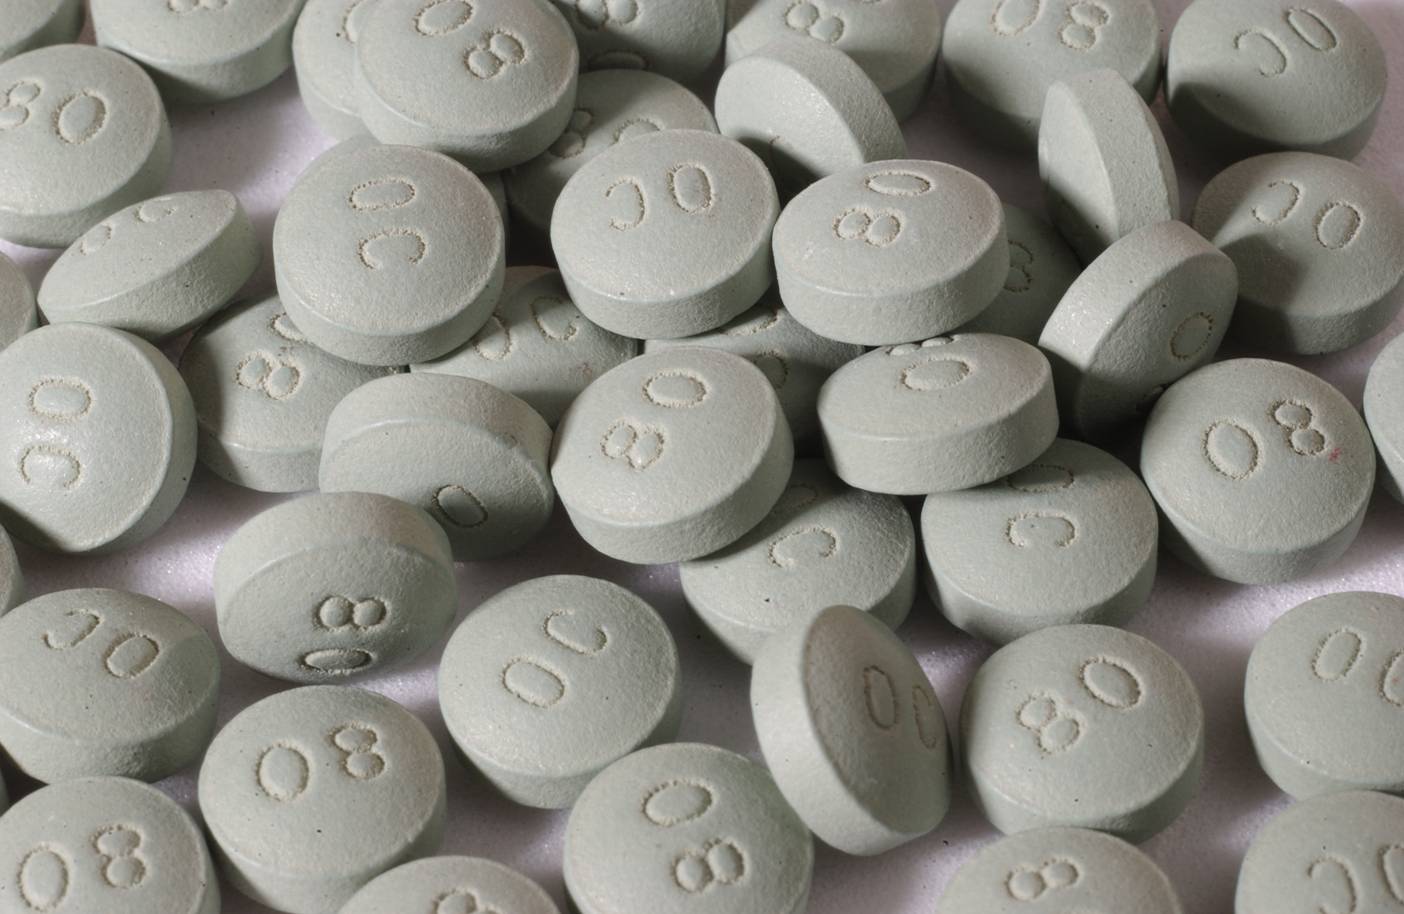 We sell Oxycontin 80mg pills online in the states... online oxycontin code....